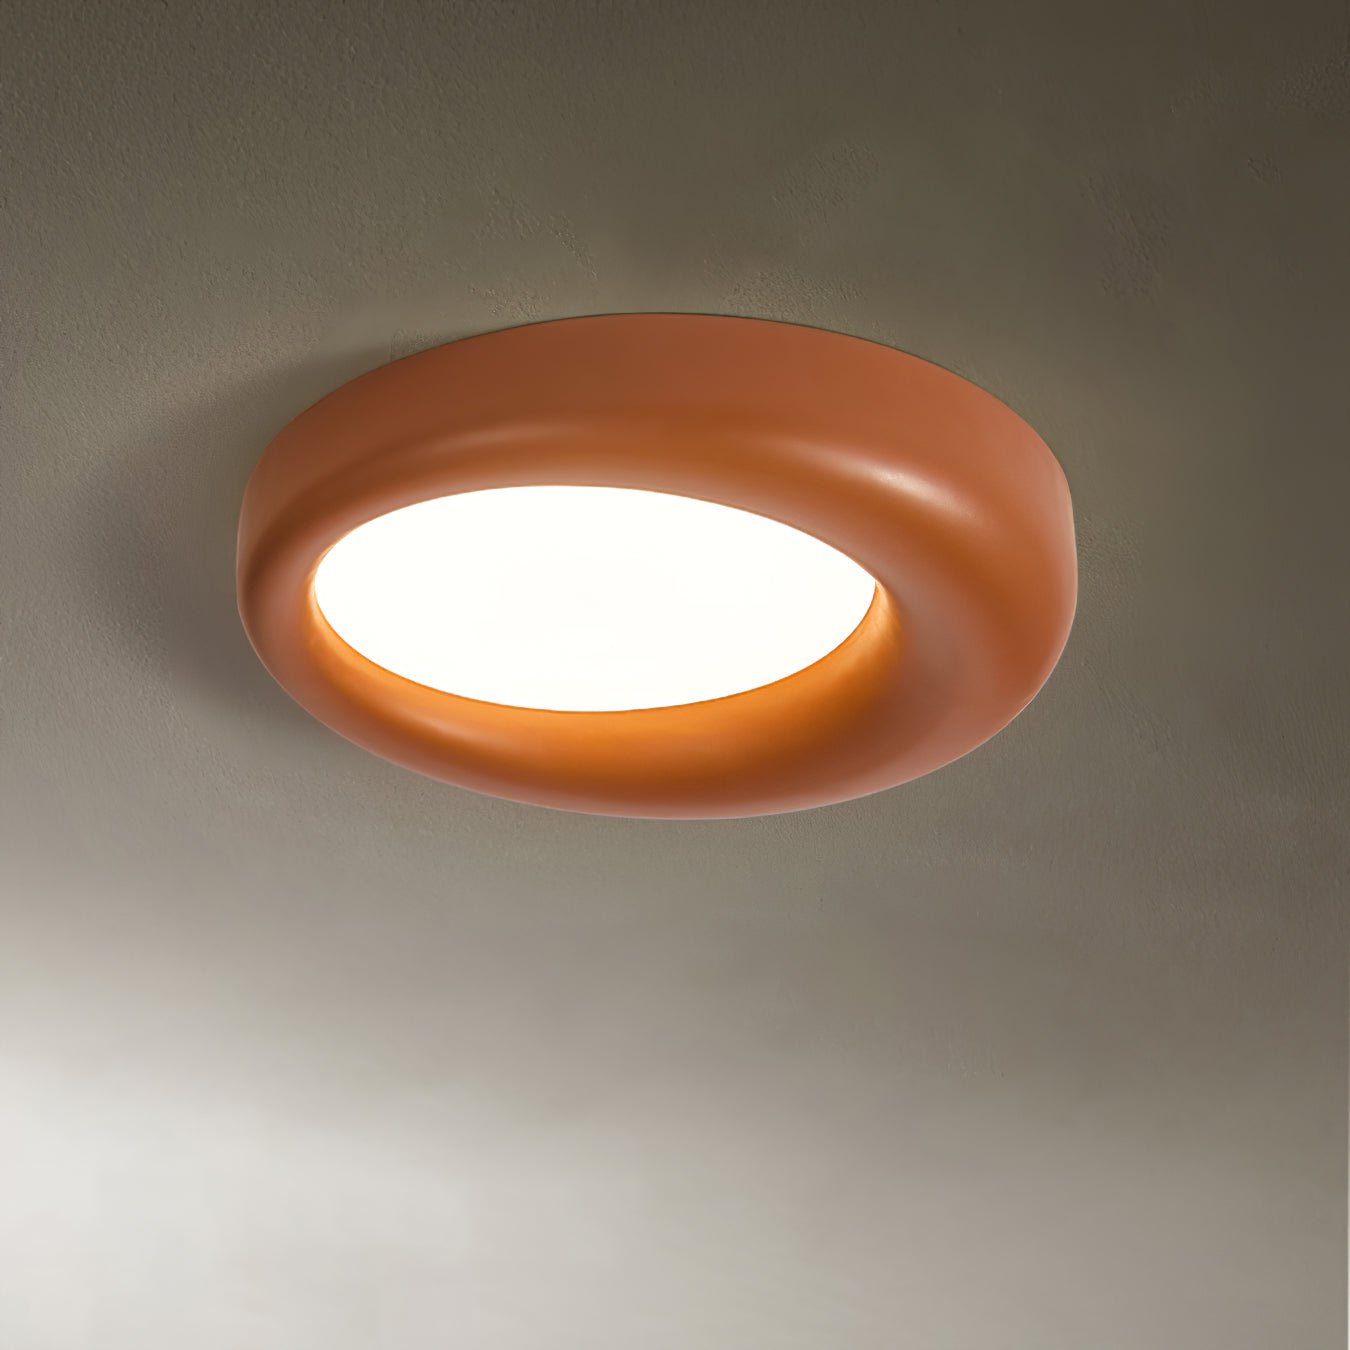 Ceiling Lamp in Orange with Cool White Light, Diameter 28.3 inches x Height 7 inches (72cm x 18cm)